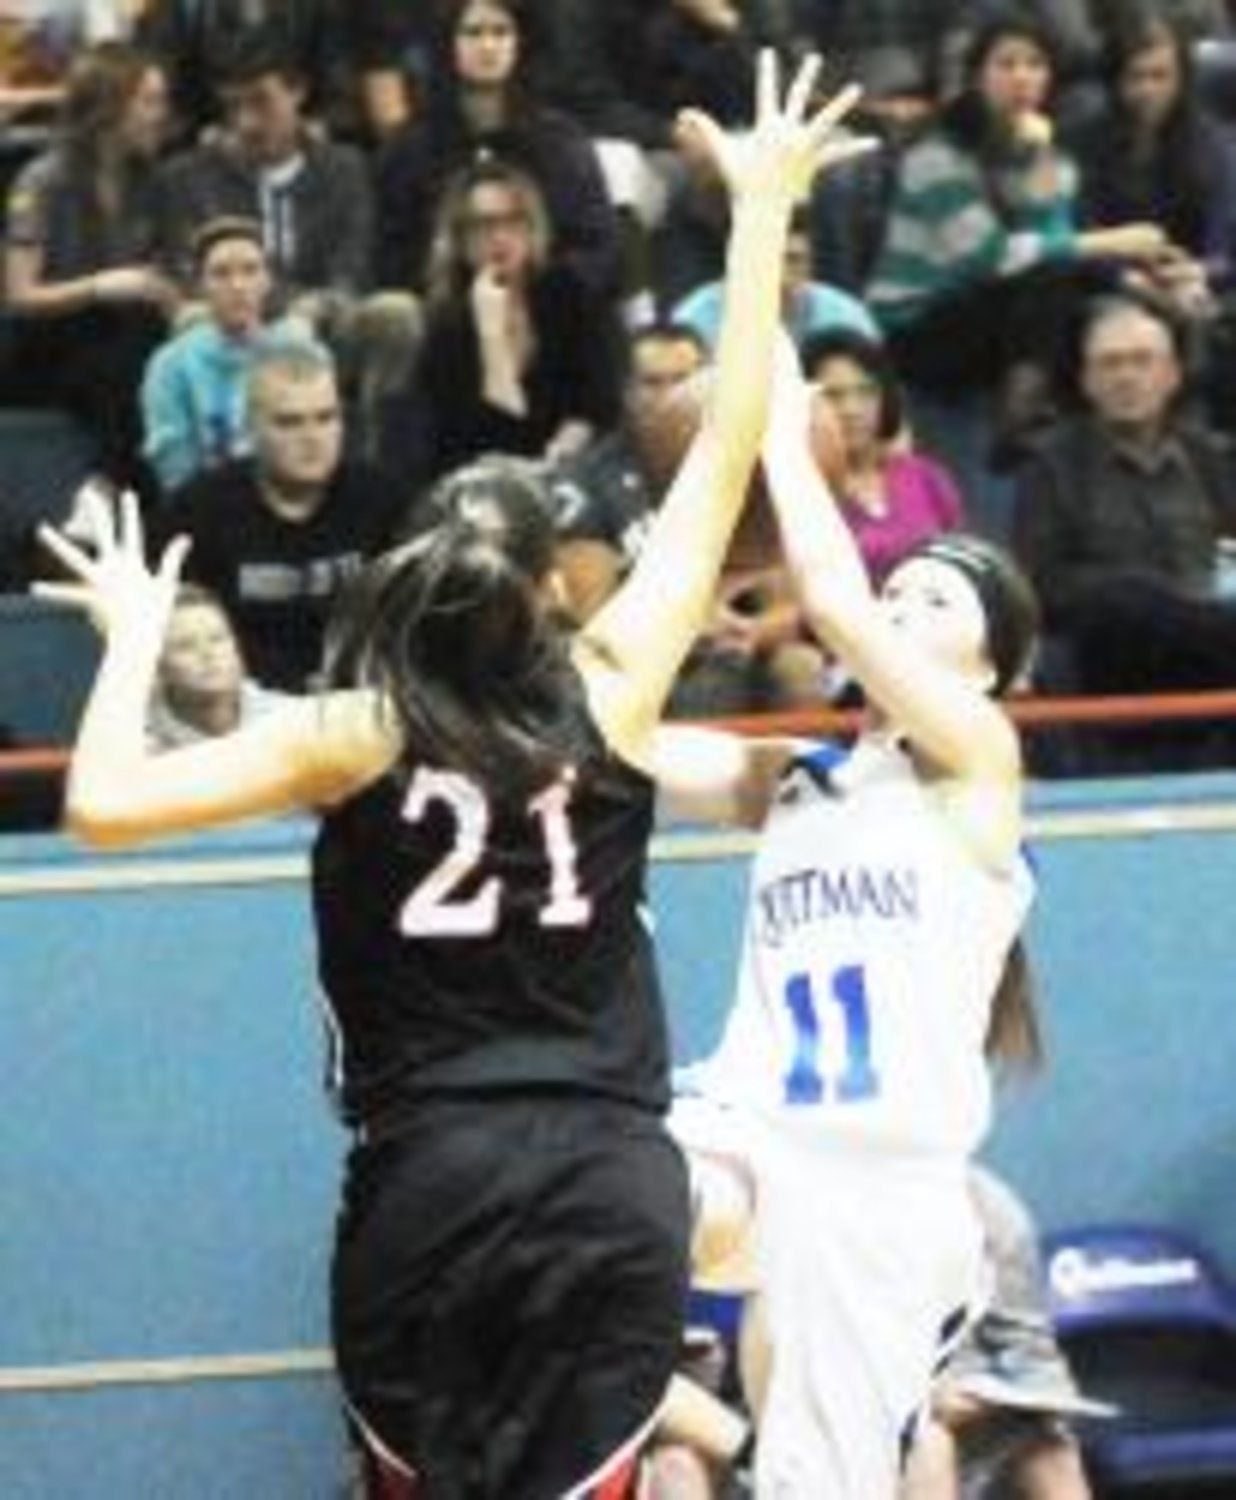 Alyssa Harris attempts to shoot over the outstretched hands of the 5' 9" Bailey Swanner during fourth quarter action.